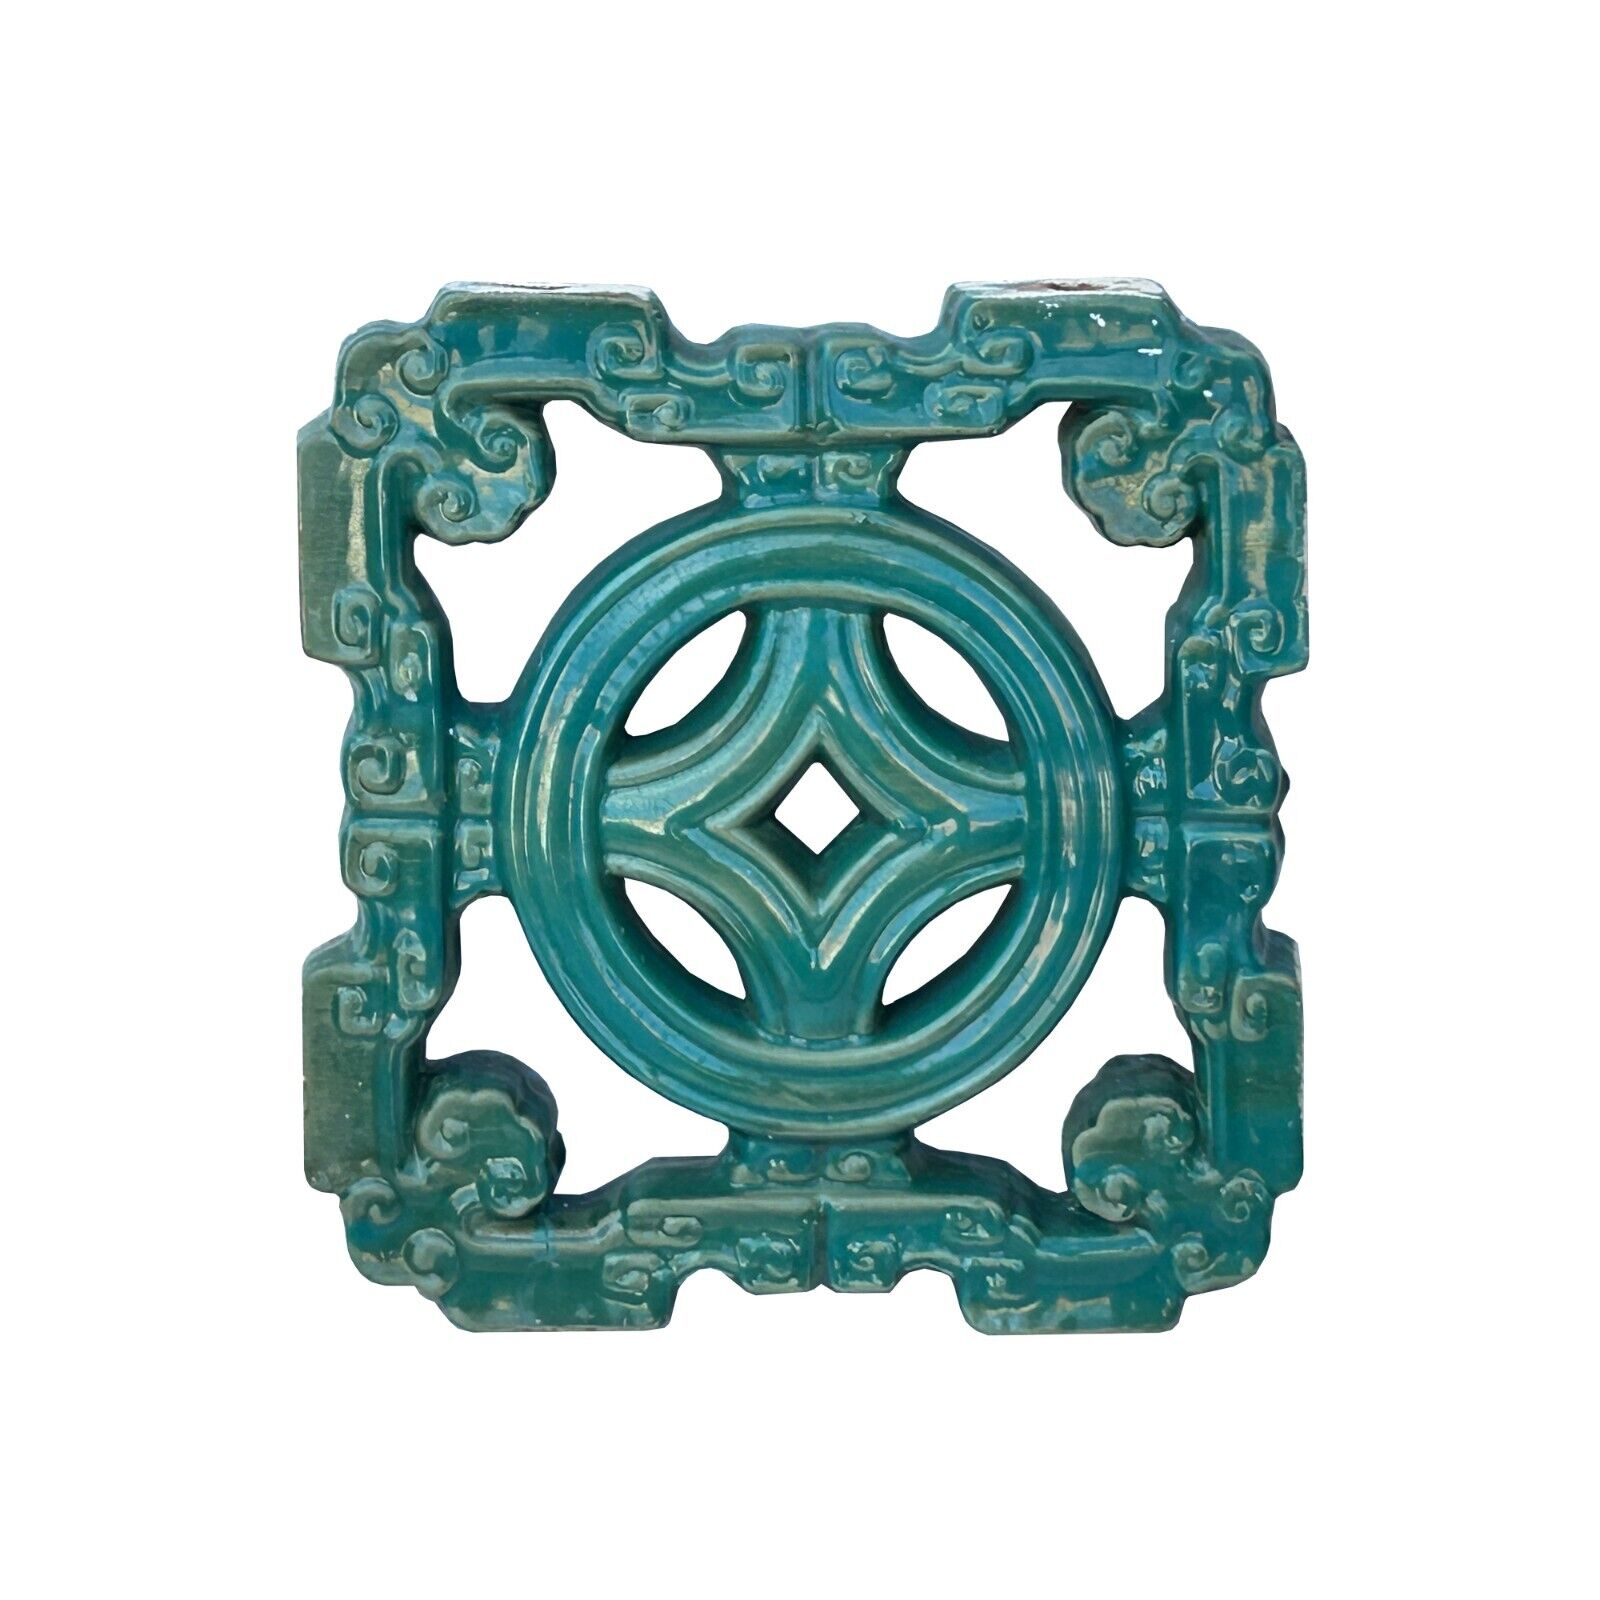 Chinese Ru-Yi Coin Turquoise Green Mix Glaze Wall Floor Clay Tile ws3587